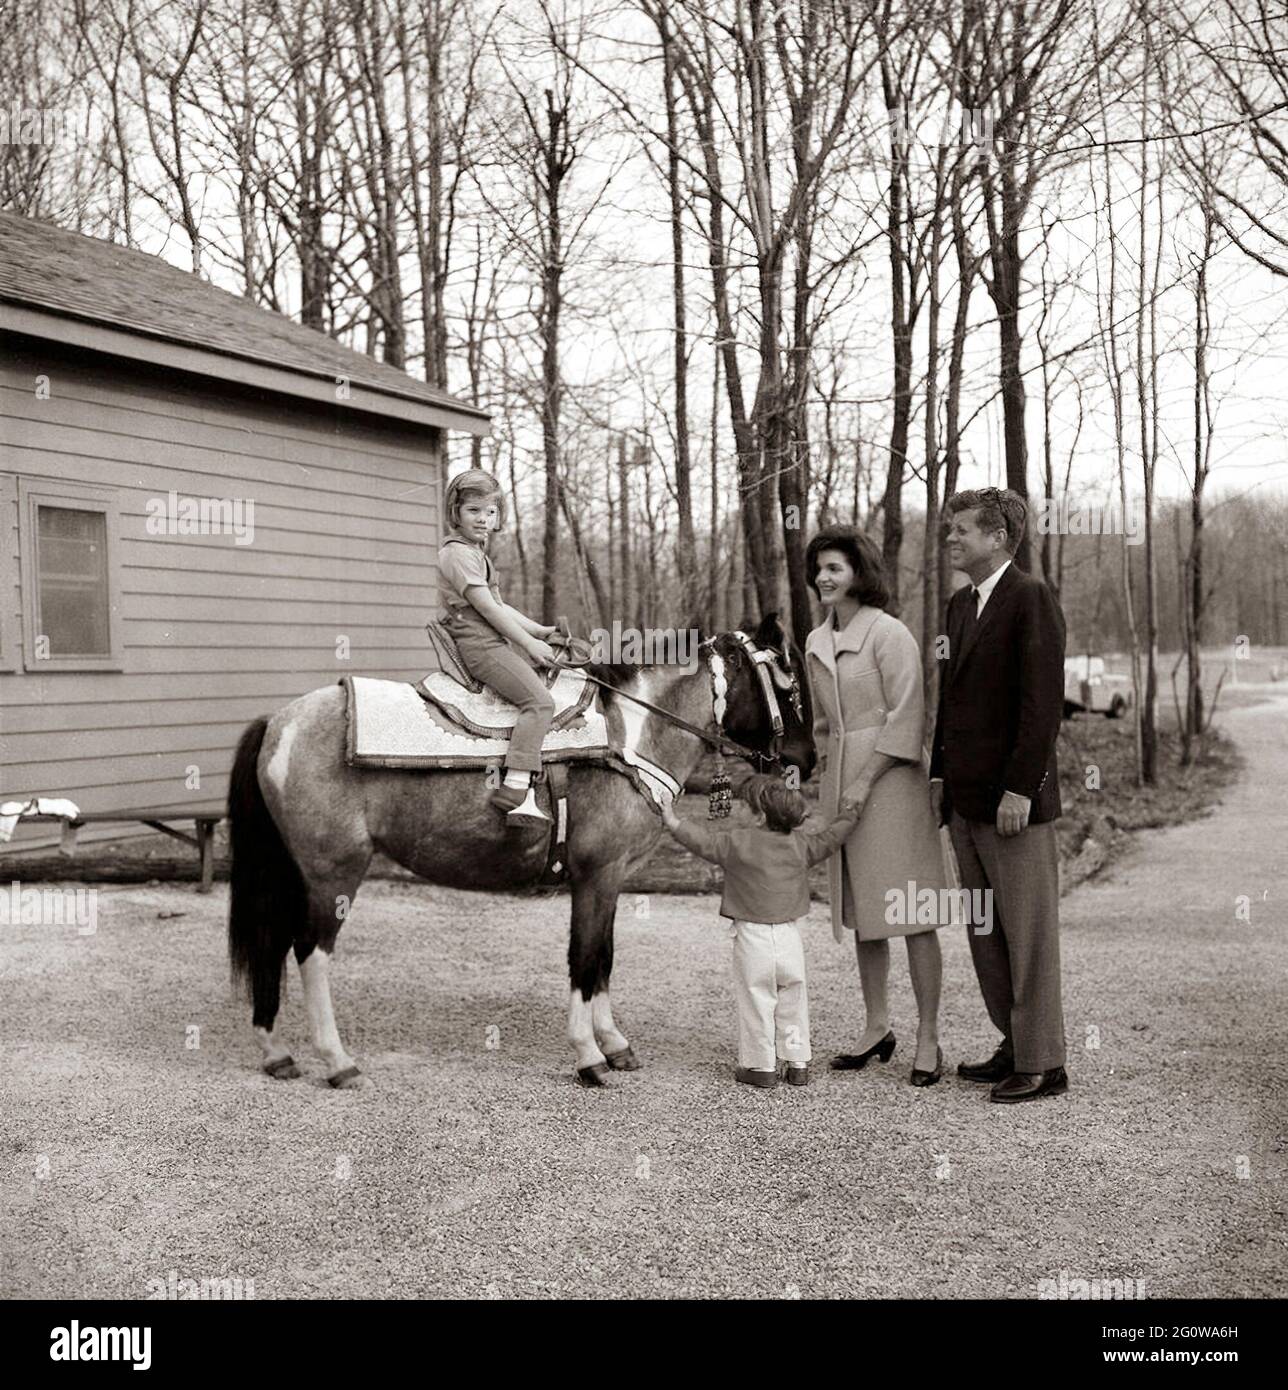 KN-C27672    31 March 1963  Weekend at Camp David. President John F. Kennedy and family watch Caroline Kennedy riding a horse named 'Macaroni' at Camp David.  'Macaroni' is wearing a blue and gold Moroccan saddle, a gift to President Kennedy from King Hassan II.  Photograph includes: (L-R) Caroline Kennedy, John F. Kennedy, Jr., First Lady Jacqueline Kennedy, and President Kennedy.  Camp David, Maryland.    Please credit 'Robert Knudsen. White House Photographs. John F. Kennedy Presidential Library and Museum, Boston' Stock Photo